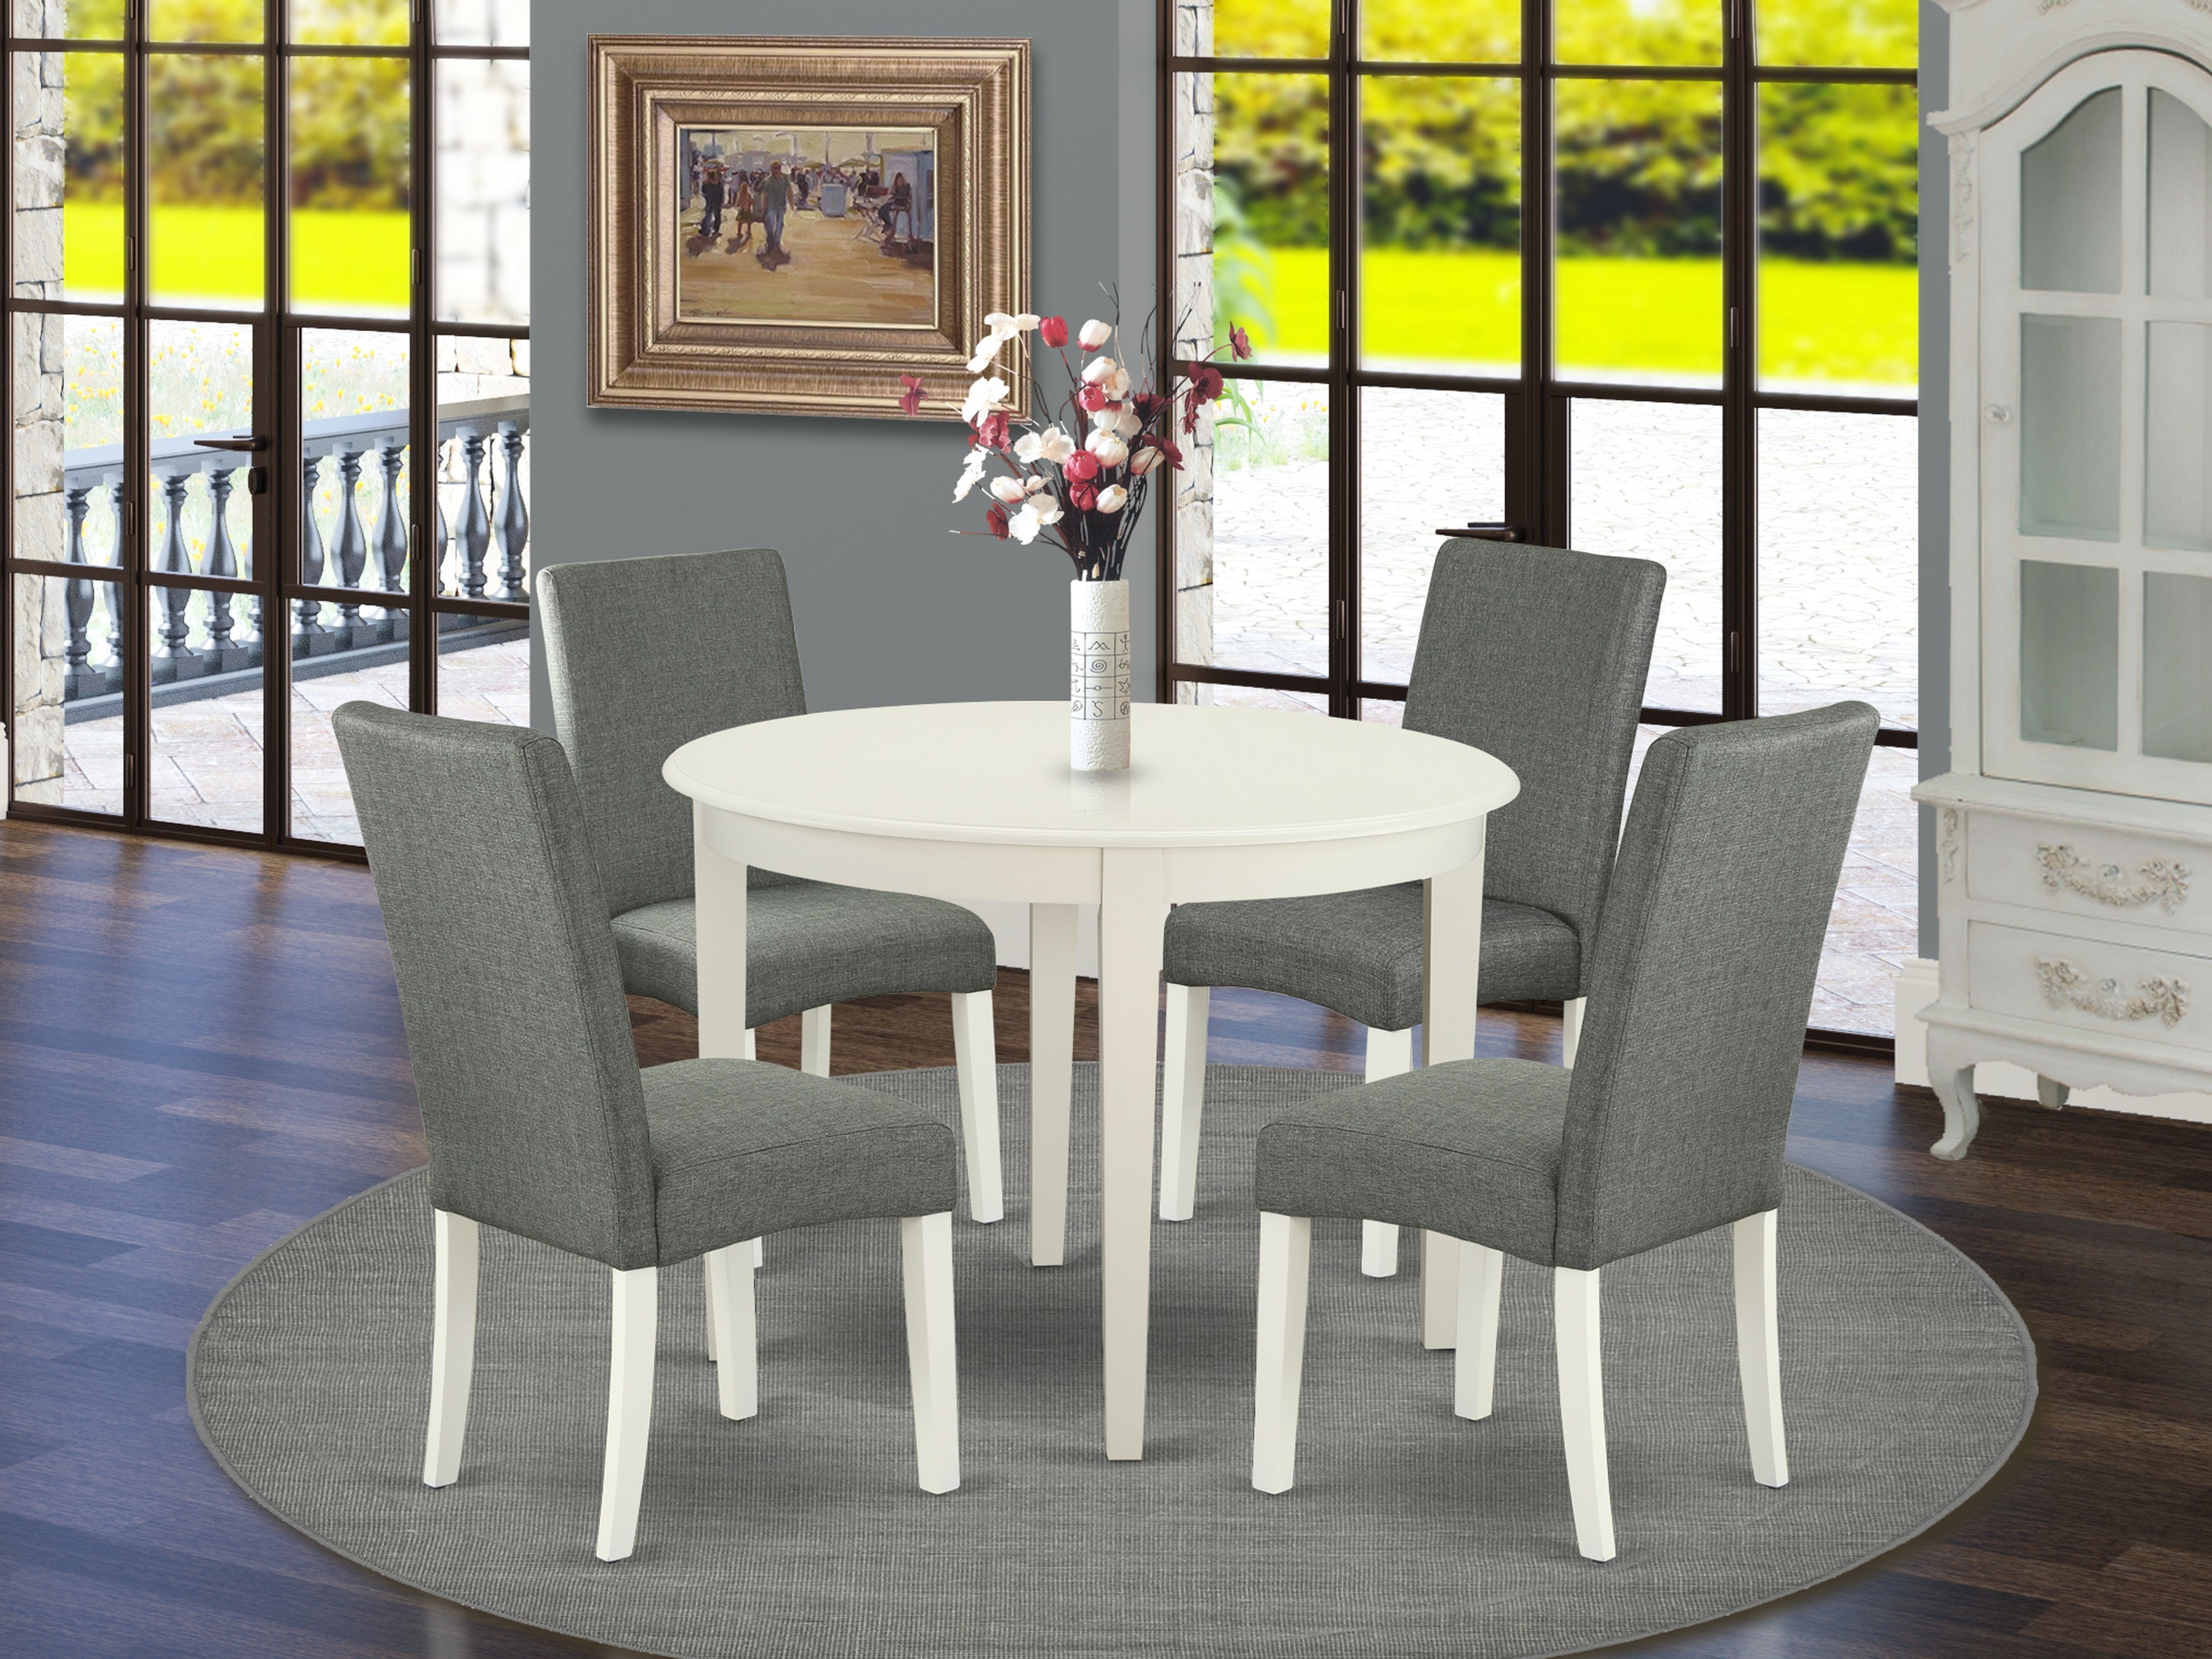 BODR5-LWH-07 5Pc Round 42" Kitchen Table And Four Parson Chair With Linen White Finish Leg And Linen Fabric- Gray Color